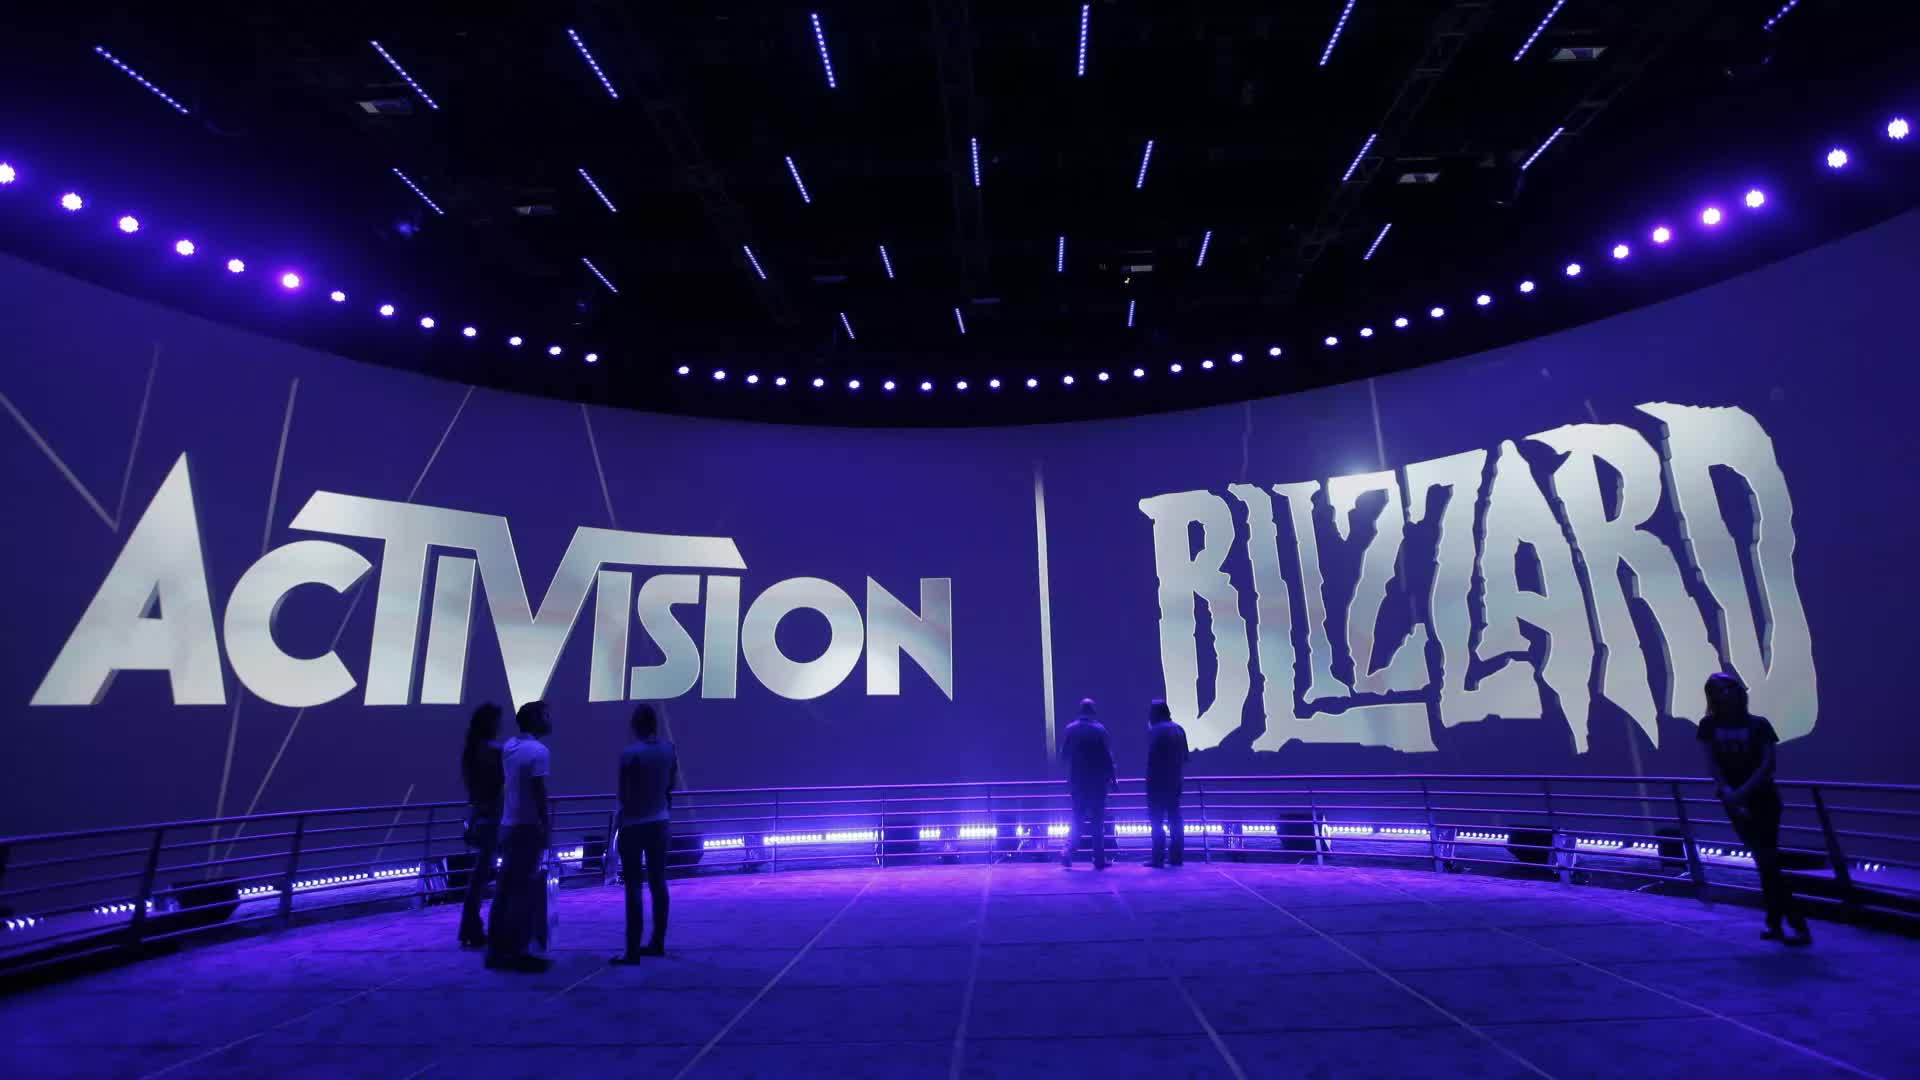 Activision Blizzard, Epic Games, and Netflix suspend services in Russia